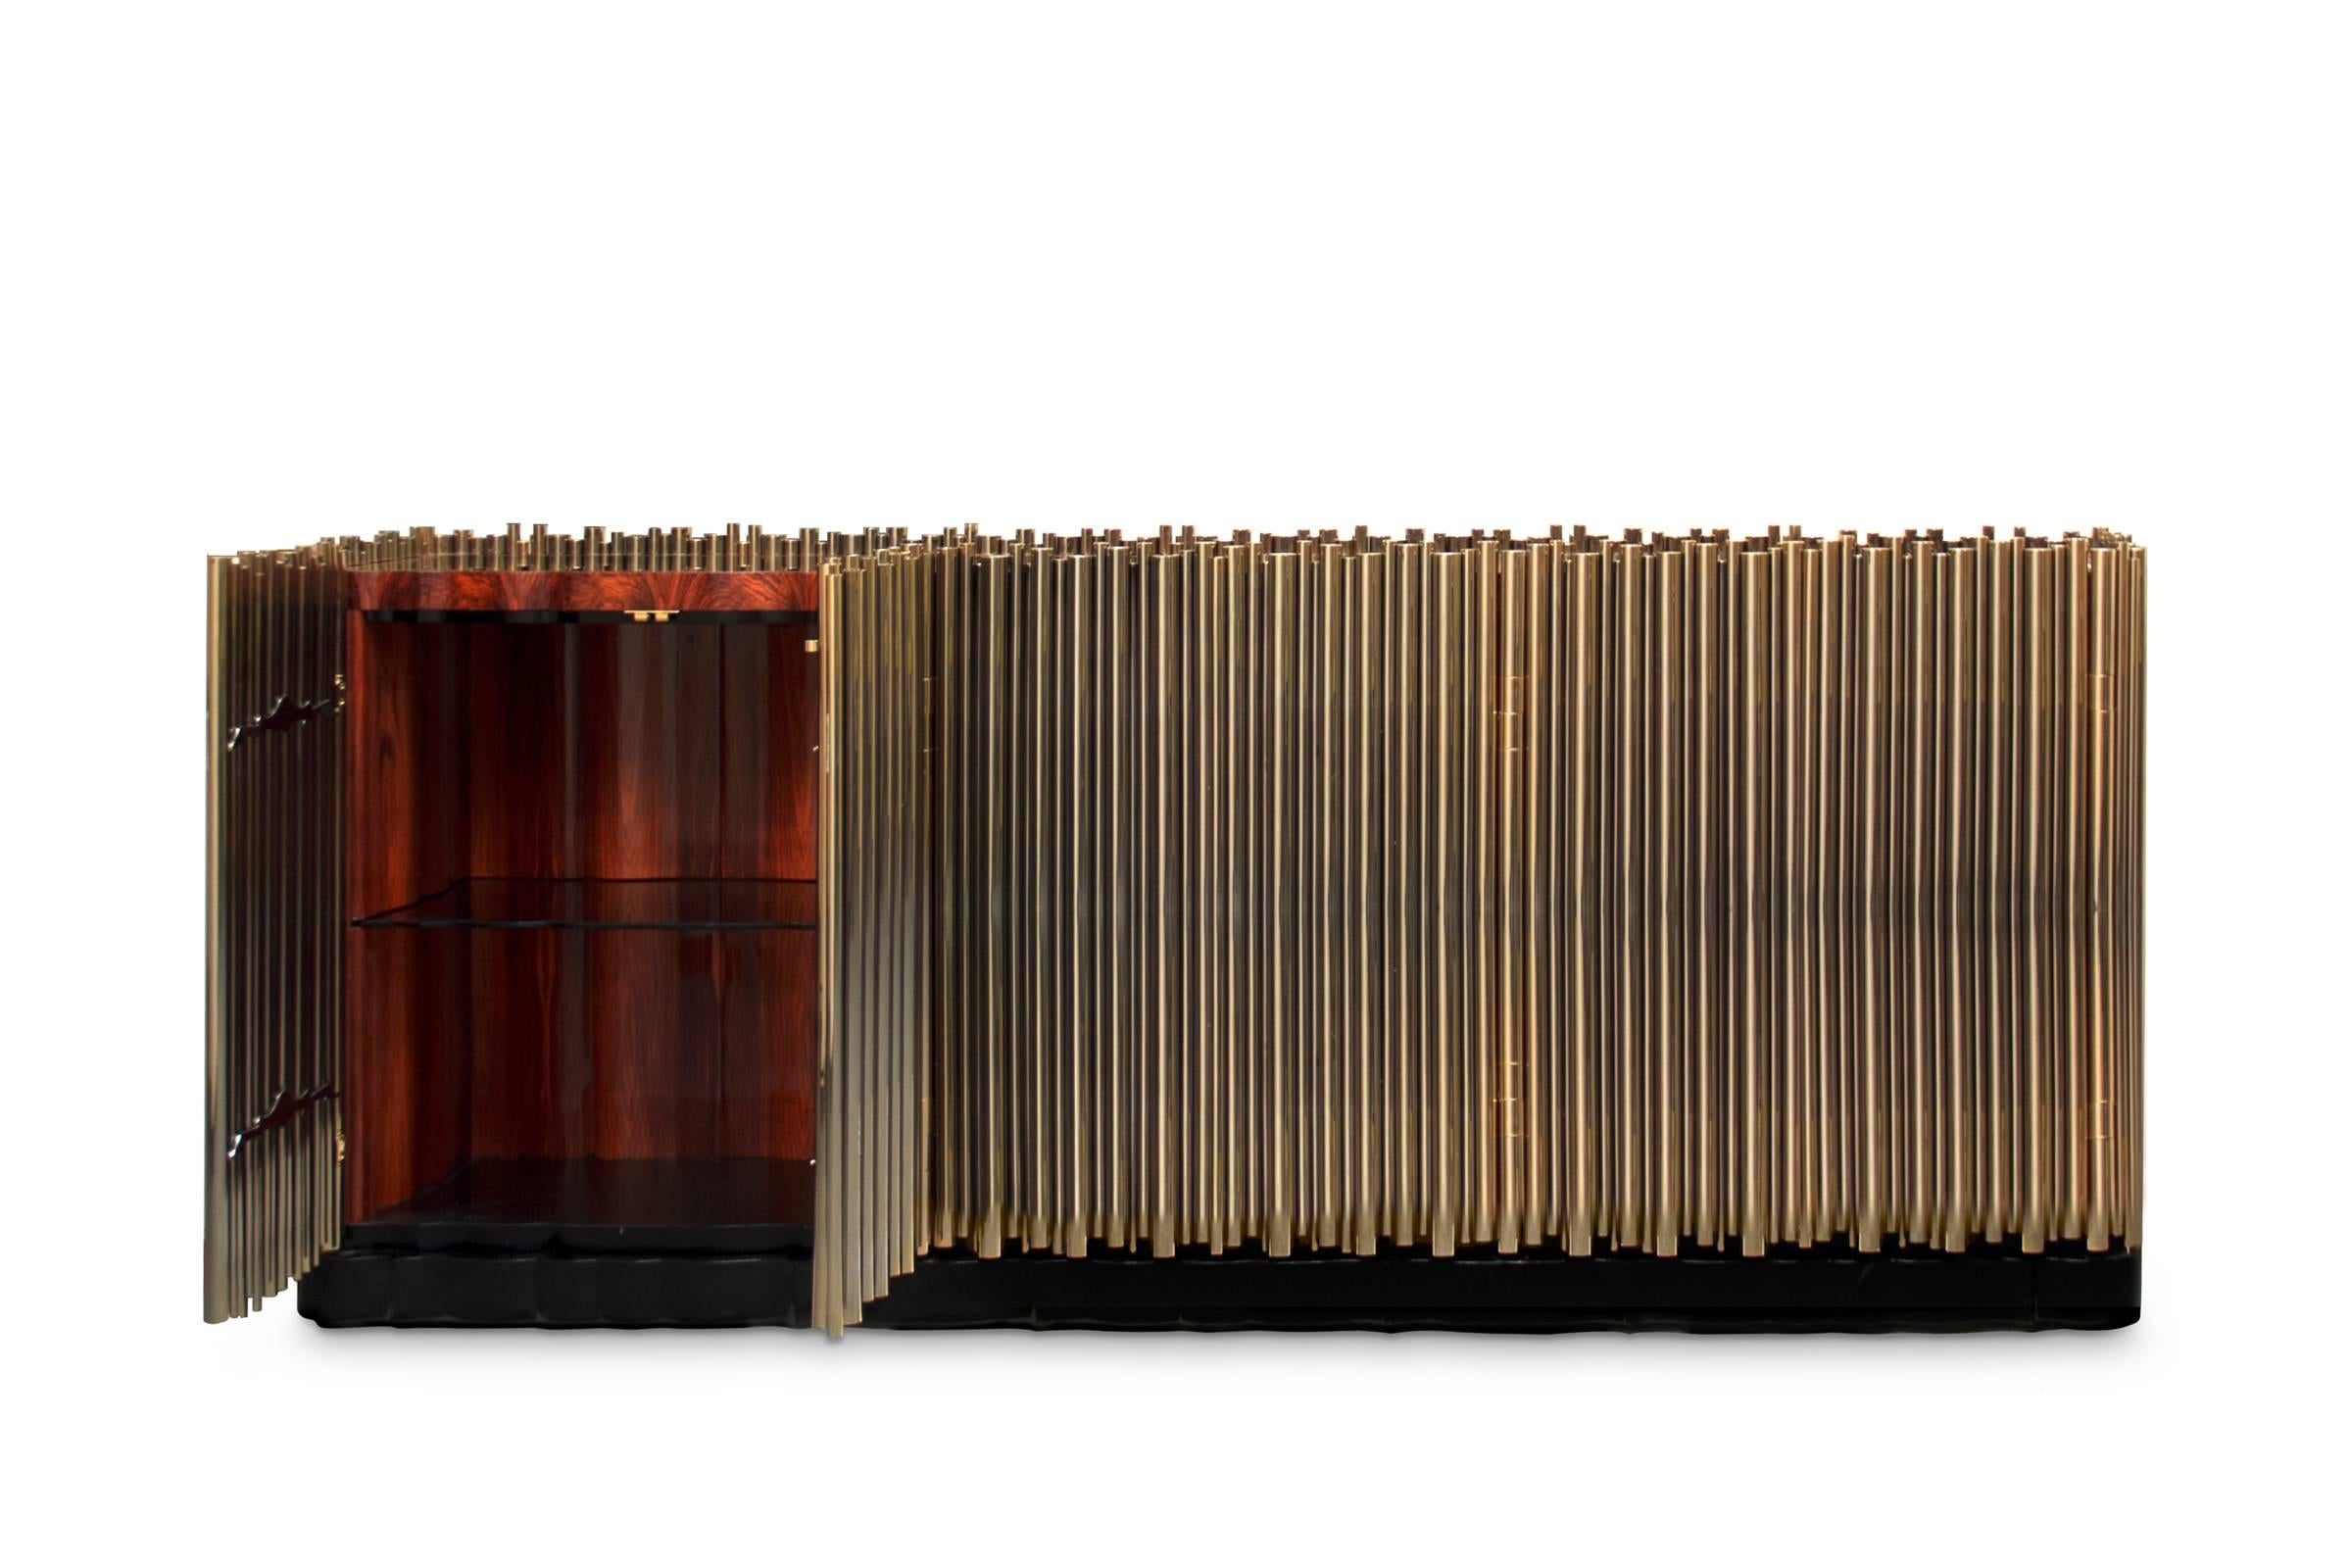 Sideboard Brass tubes in polished brass tubes
that wrap an exotic wooden structure, creating a
clever juxtaposition. Exceptional piece.
L168xD45xH95cm, price: 87900,00€.
L232xD45xH95cm, price: 112900,00€.
